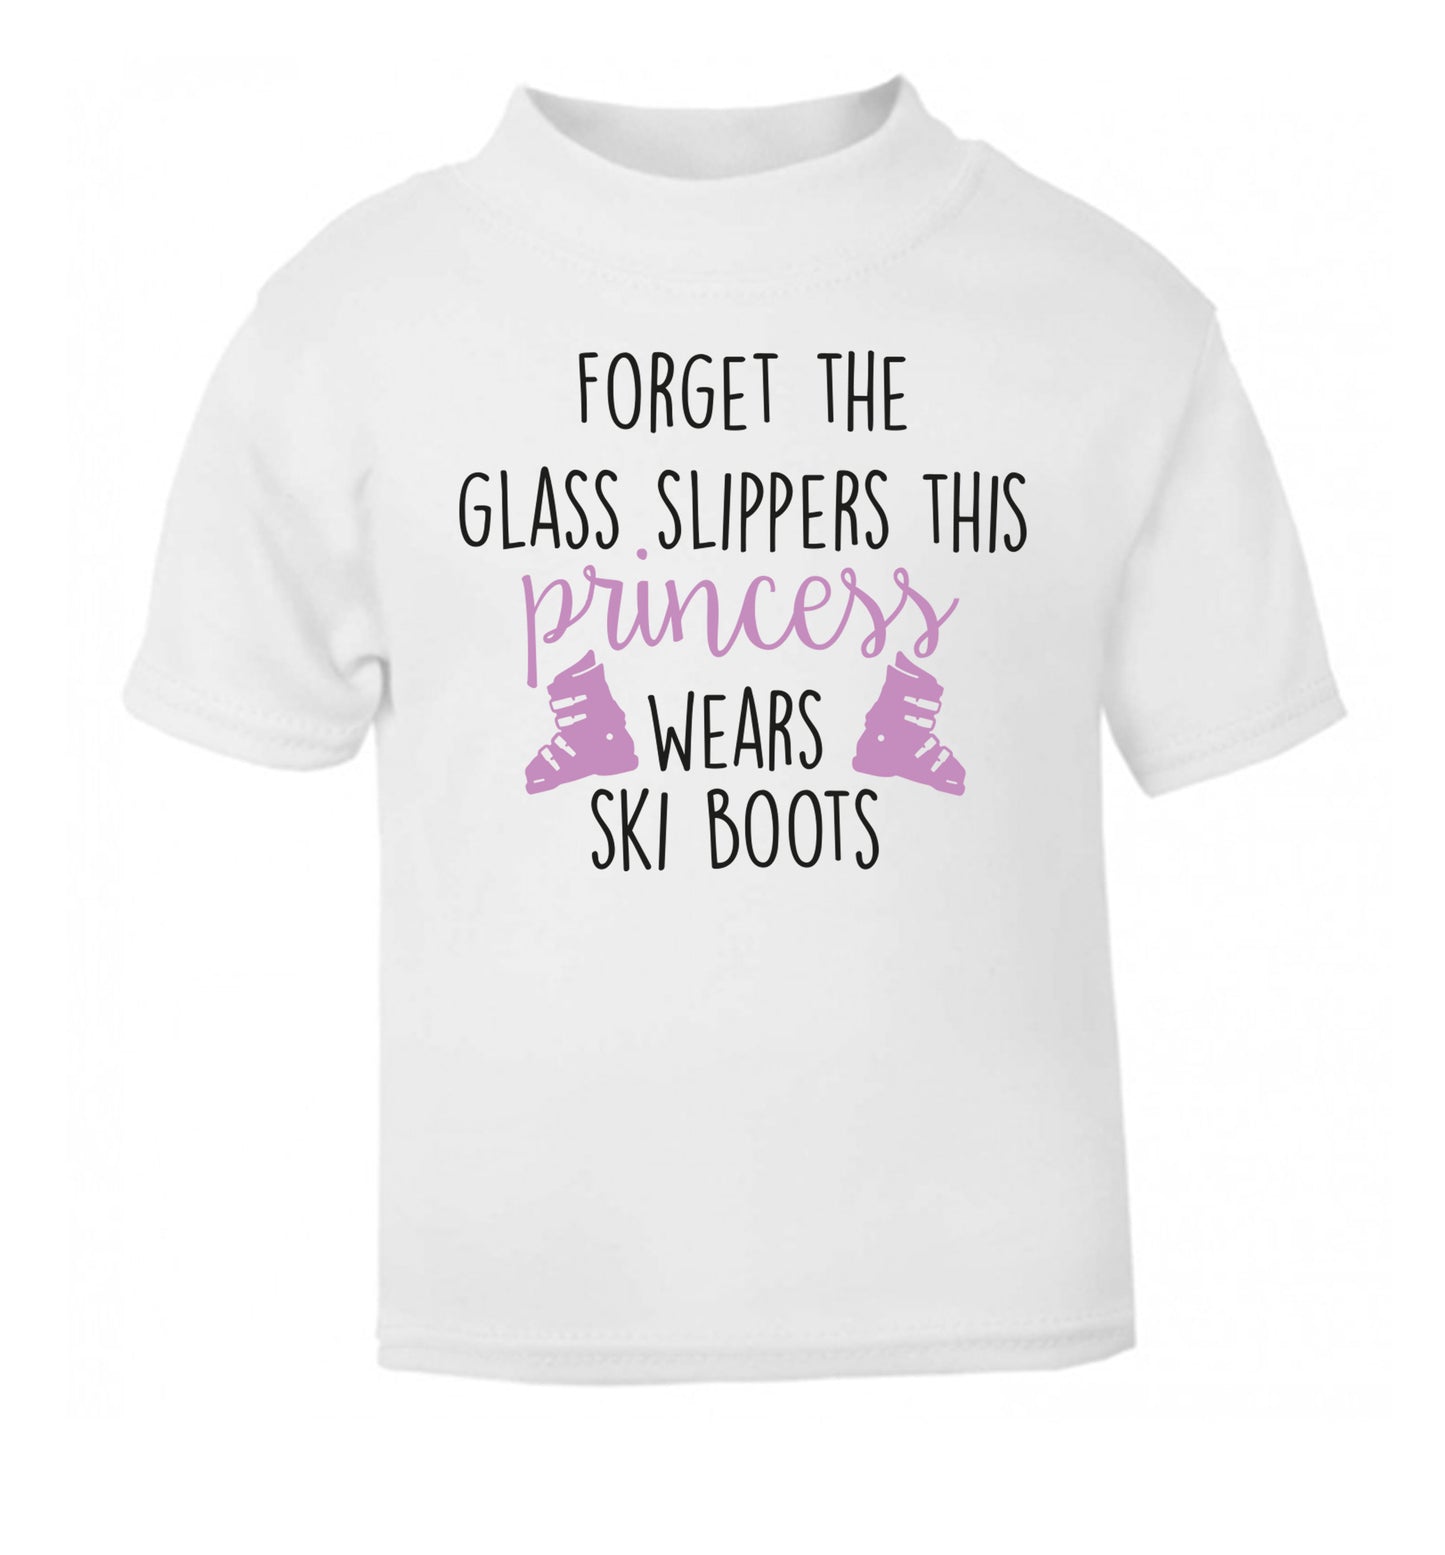 Forget the glass slippers this princess wears ski boots white Baby Toddler Tshirt 2 Years